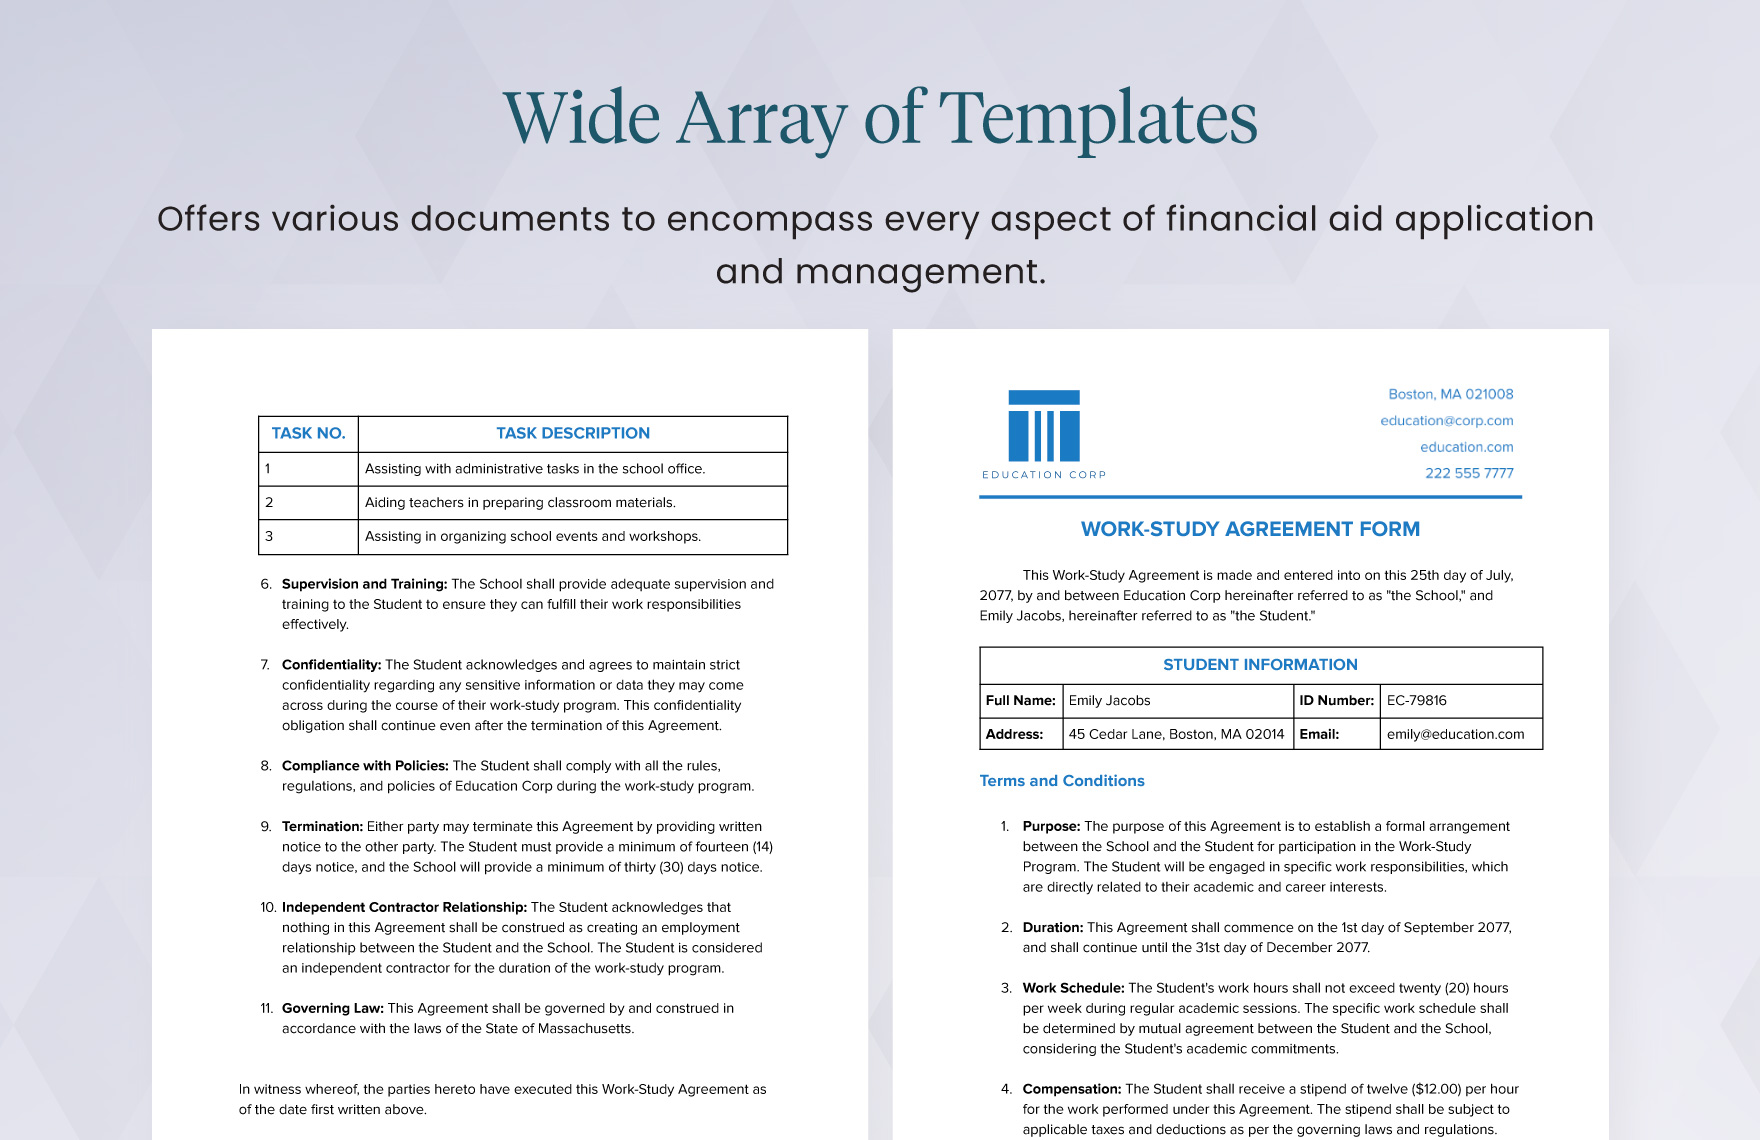 Work-Study Agreement Form Template